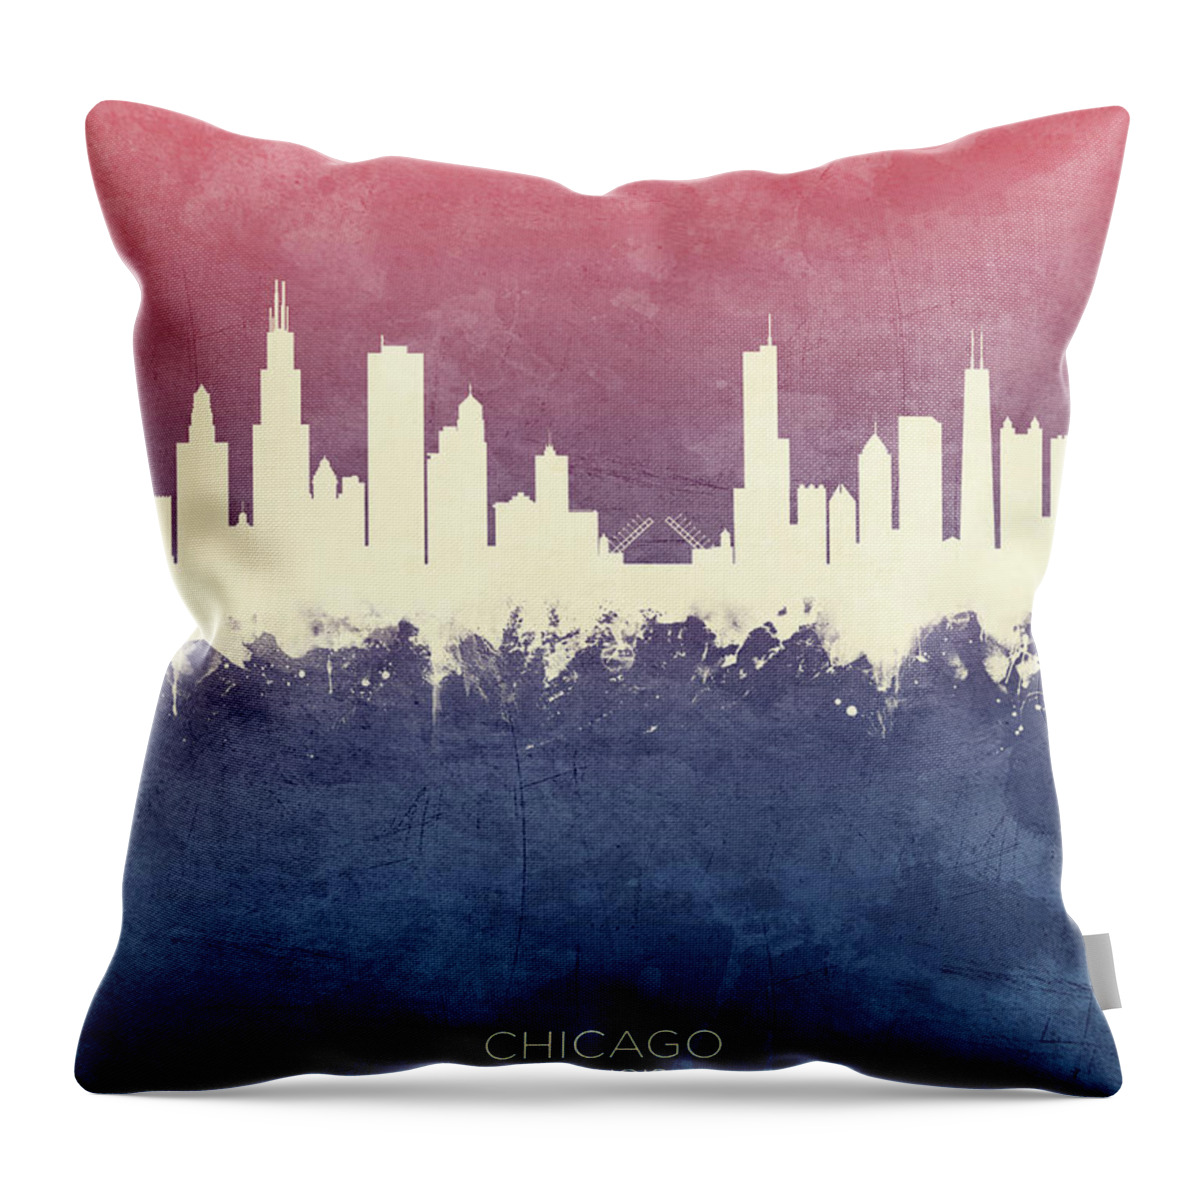 Chicago Throw Pillow featuring the digital art Chicago Illinois Skyline #39 by Michael Tompsett